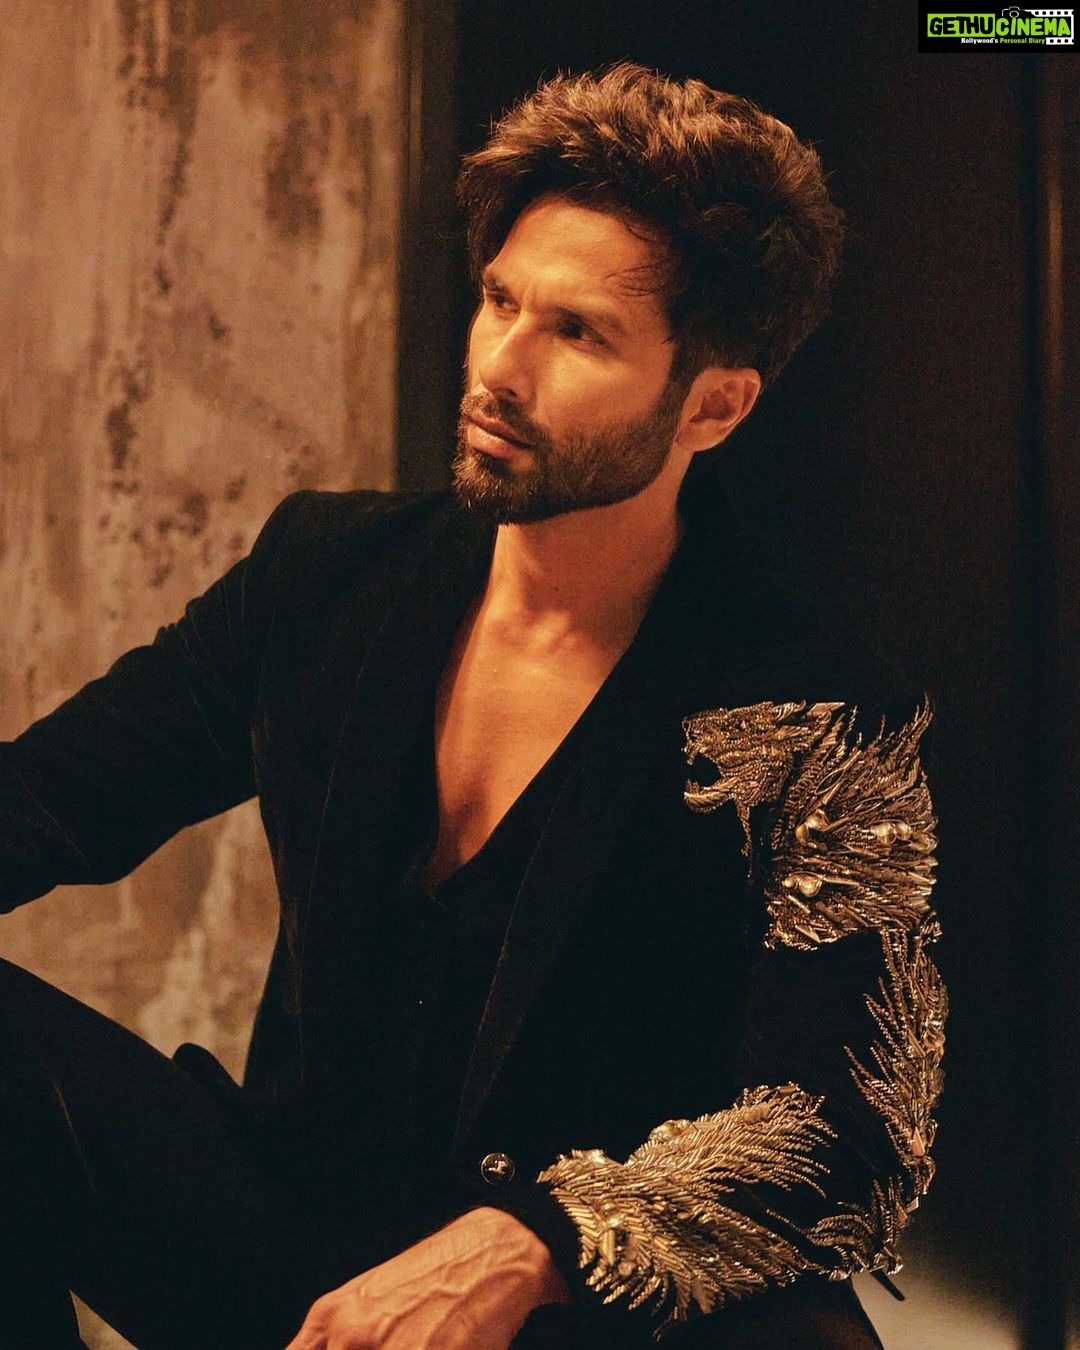 Shahid's hair cut is the new look this summer!! | India Forums